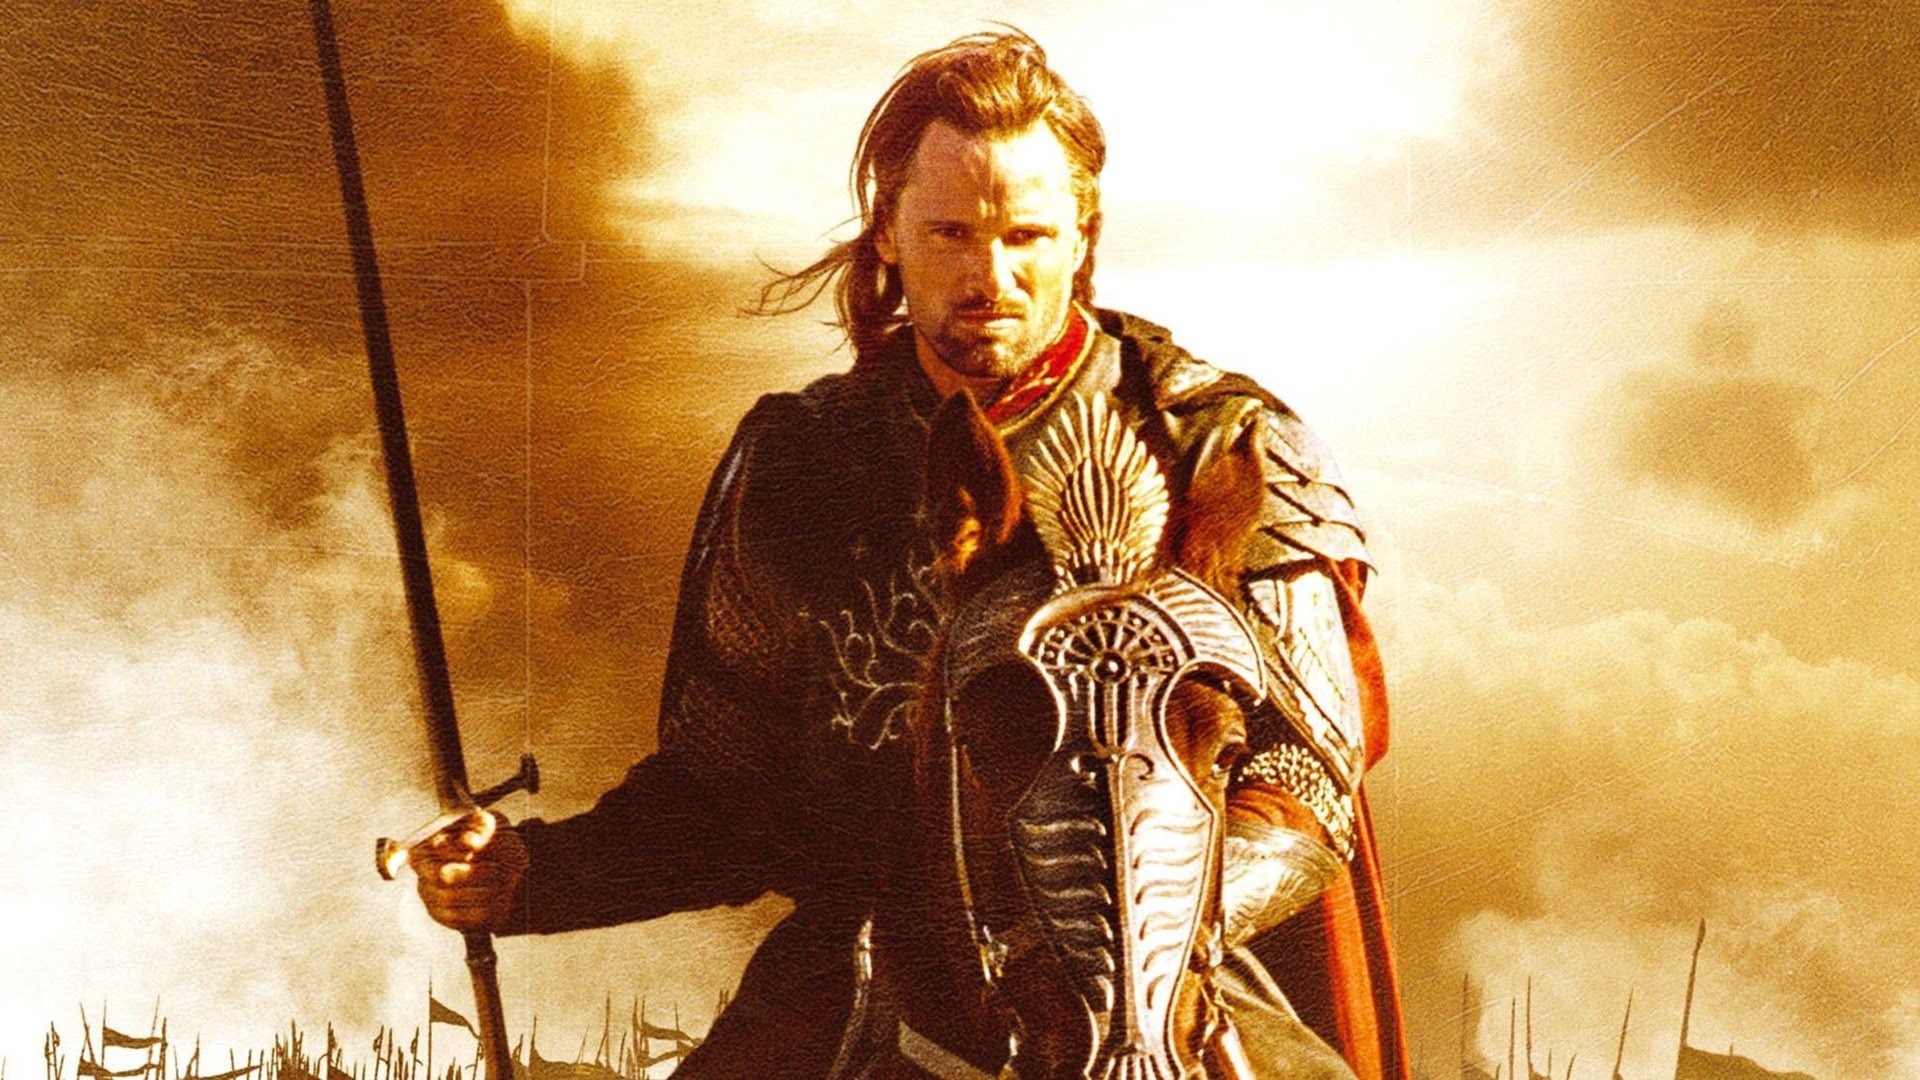 The Return of the King: A Dunedain ranger who must finally face his destiny as King of Gondor. 1920x1080 Full HD Background.